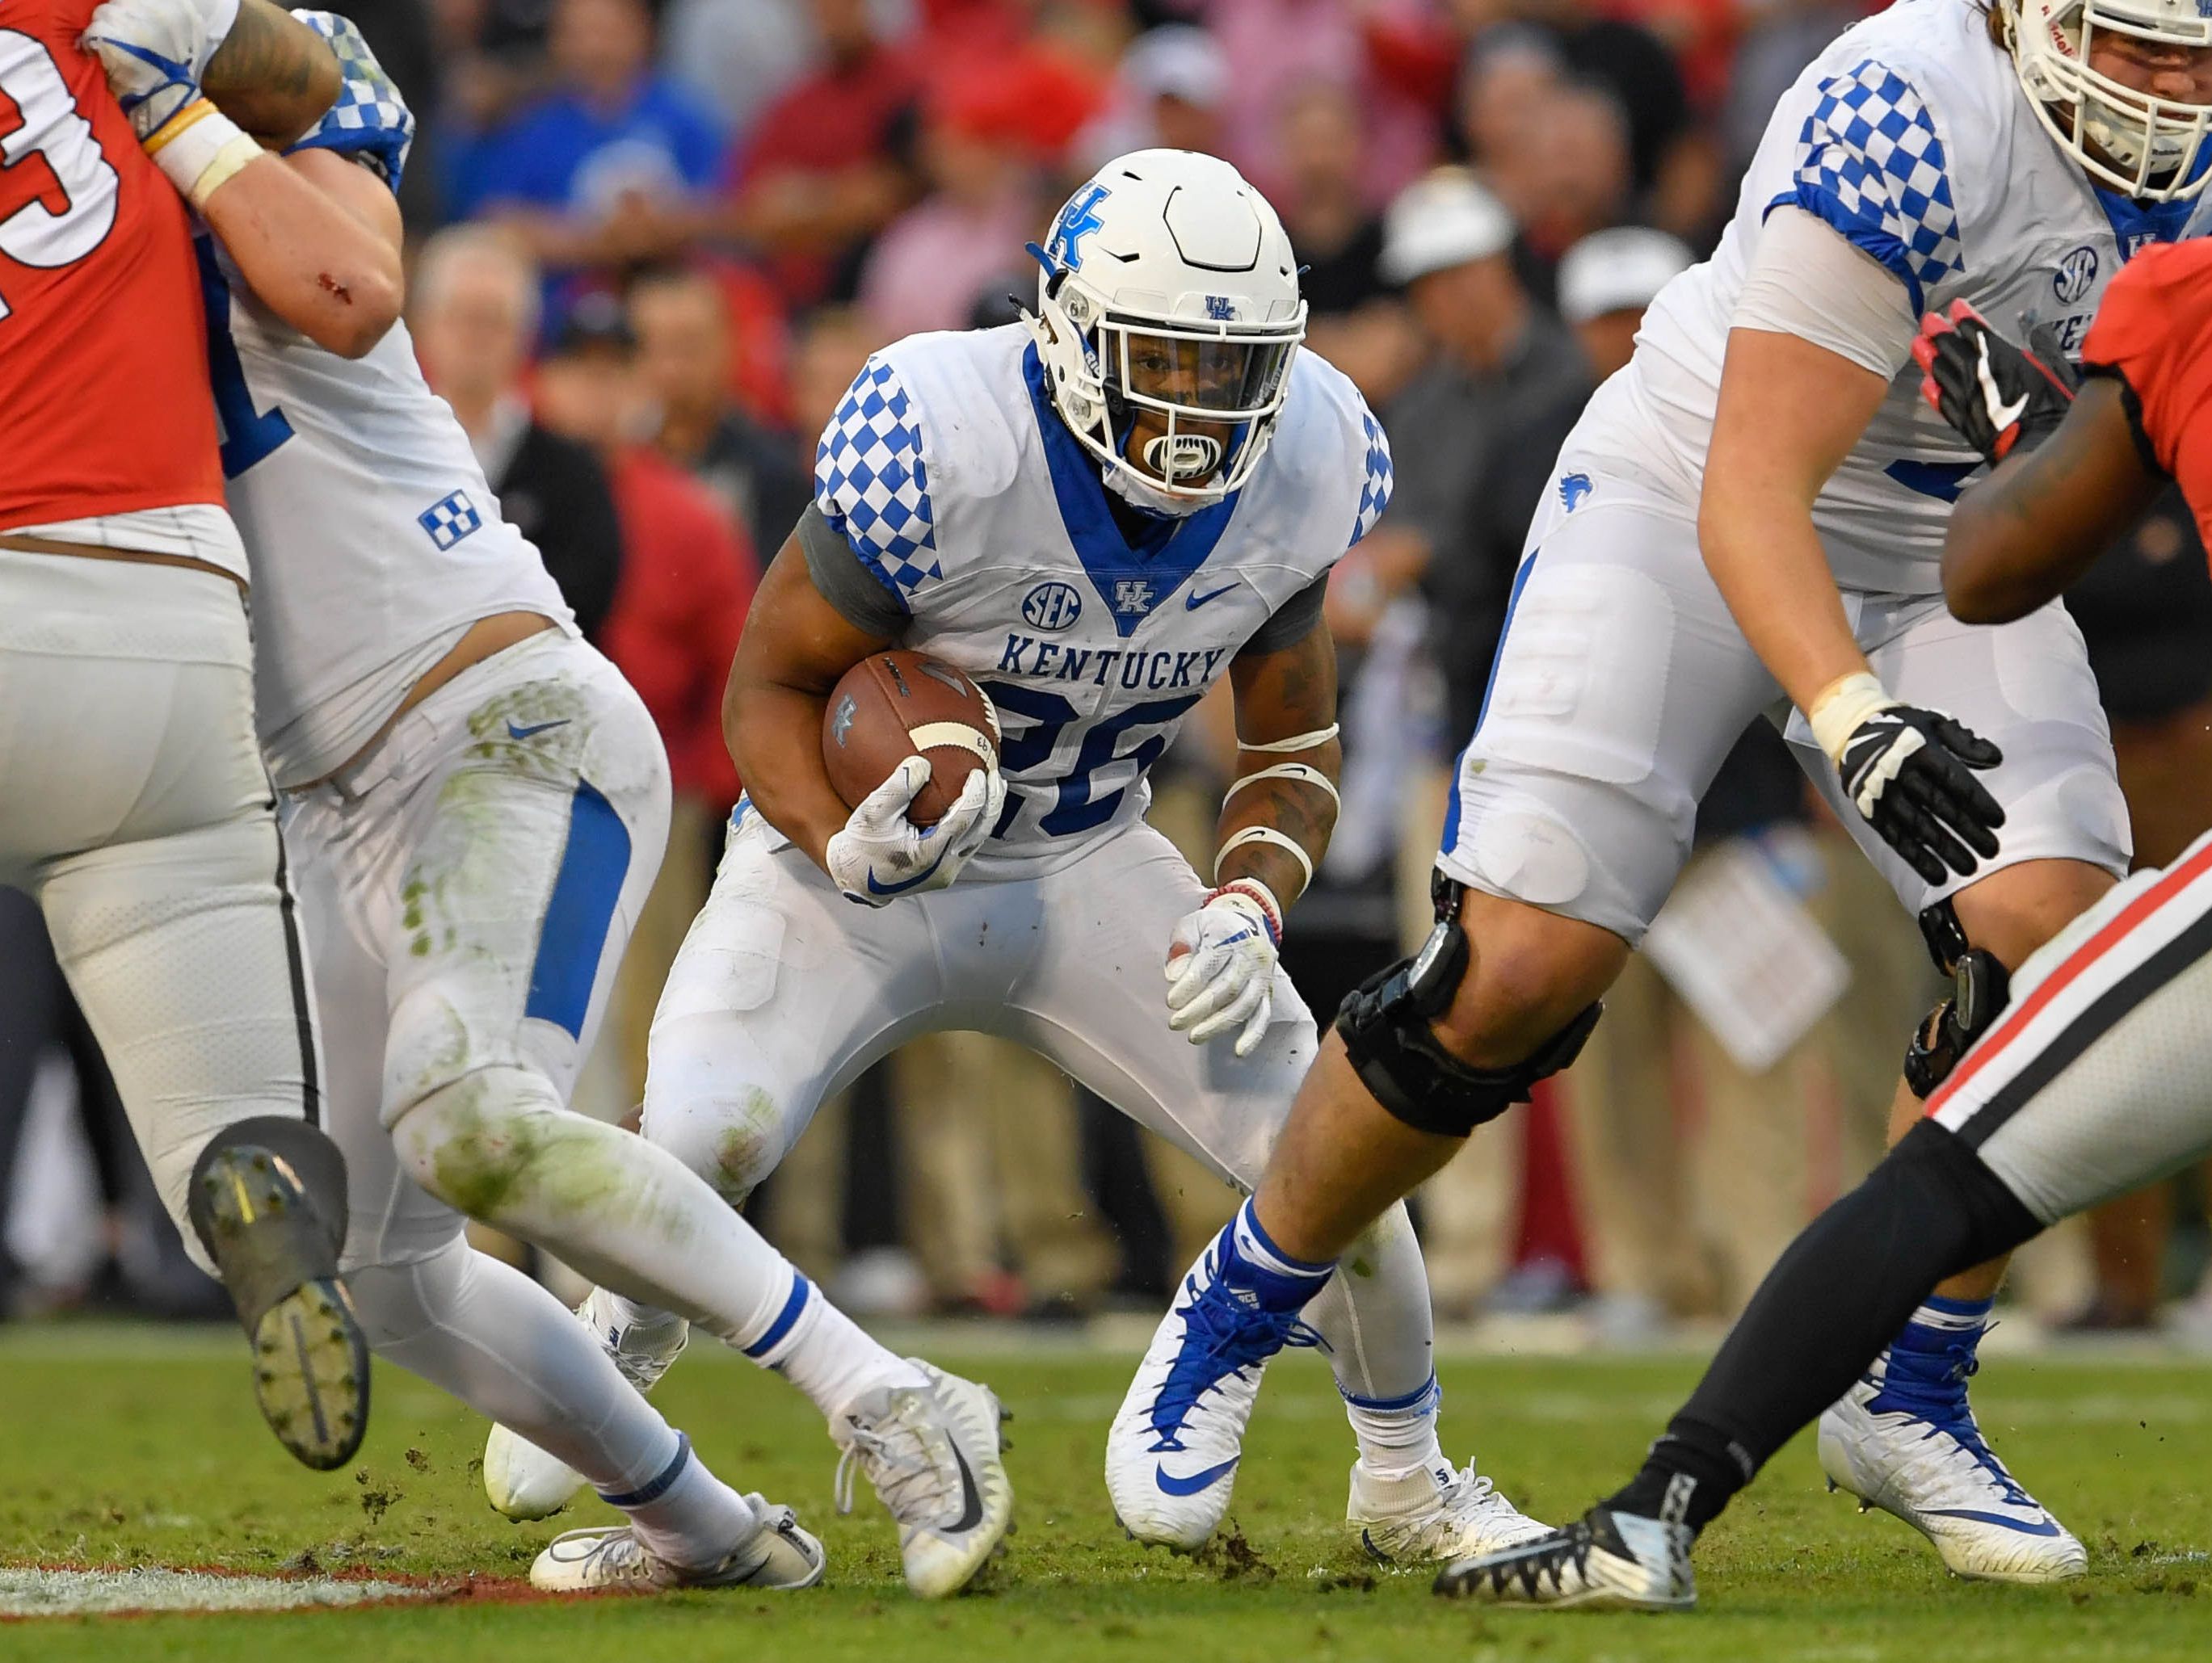 Kentucky vs. football game could be CBS’ SEC game of the week